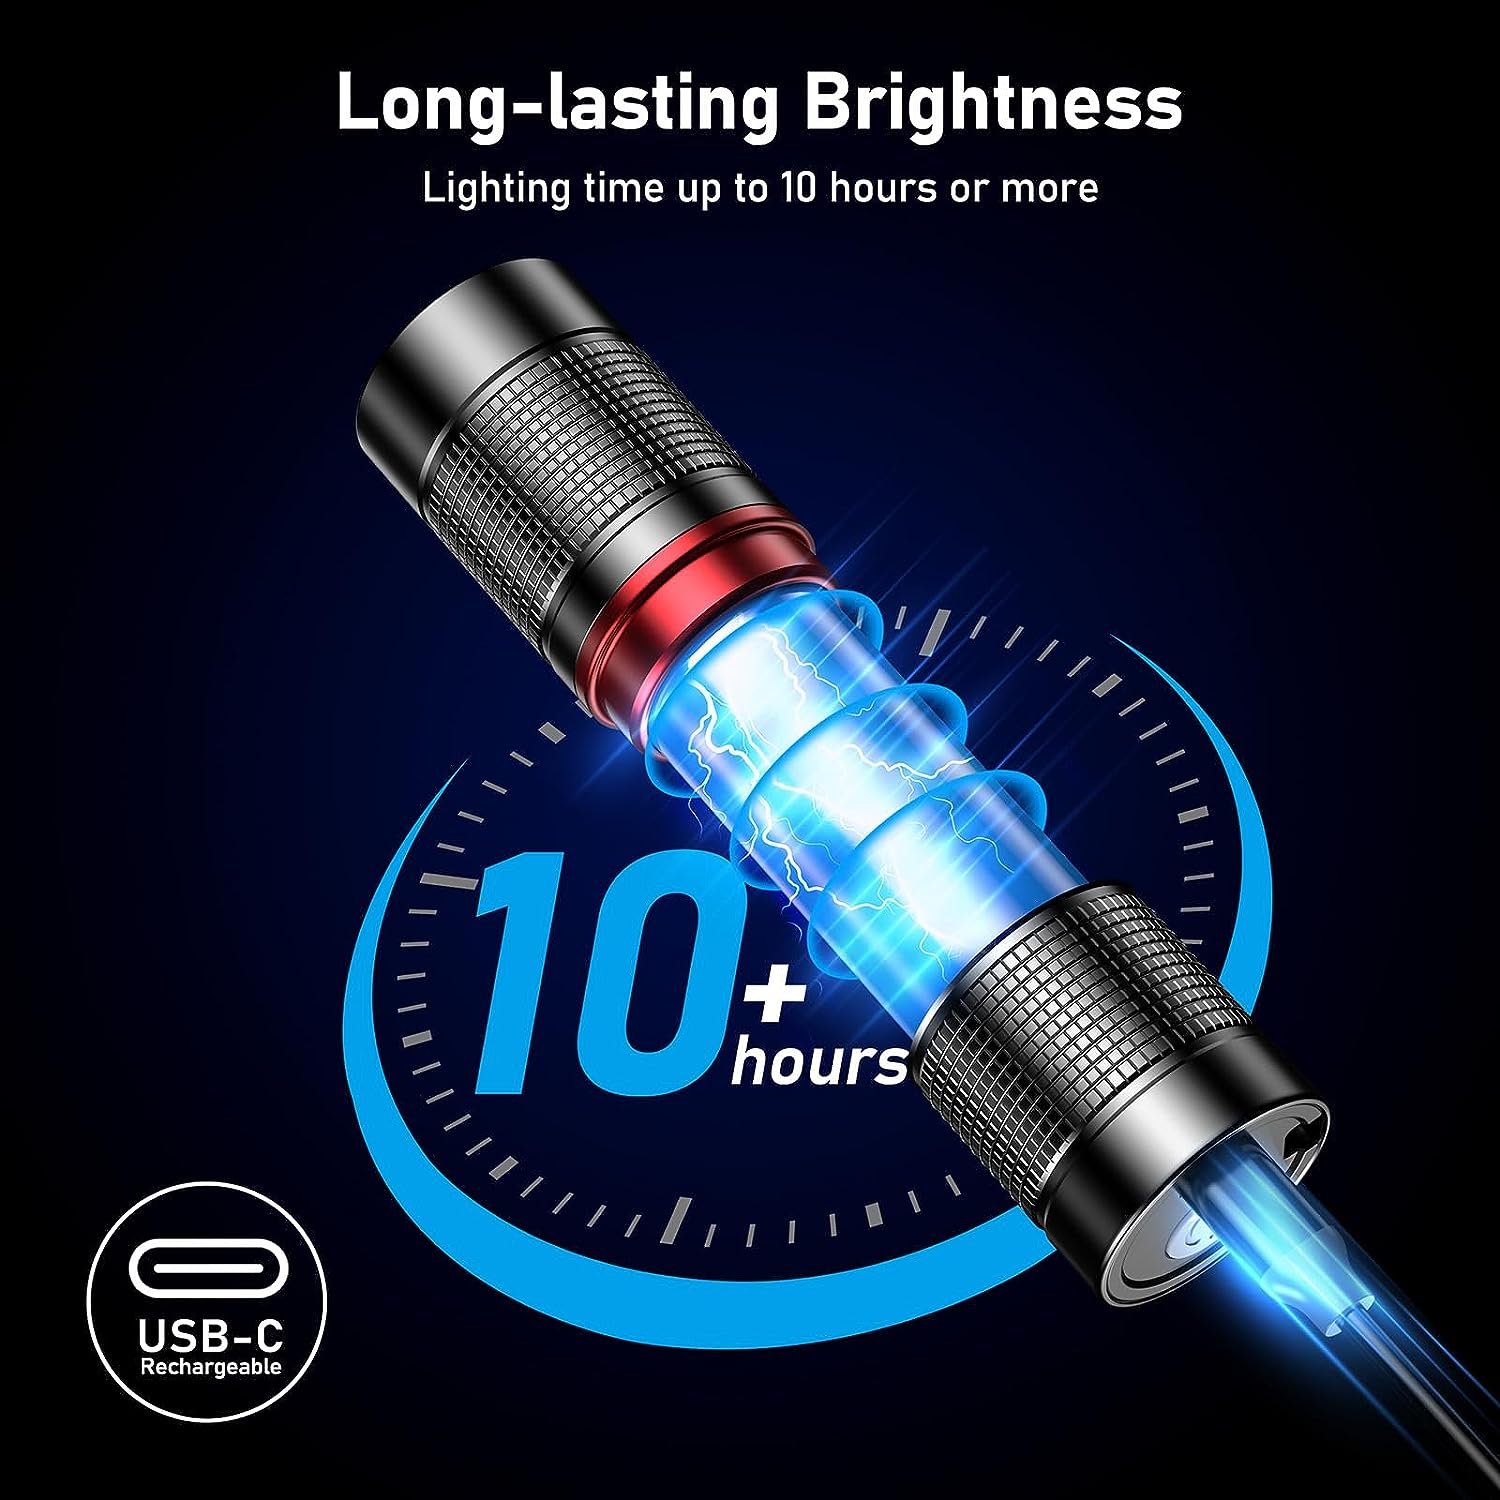 Super Bright LED Flashlight Rechargeable Review